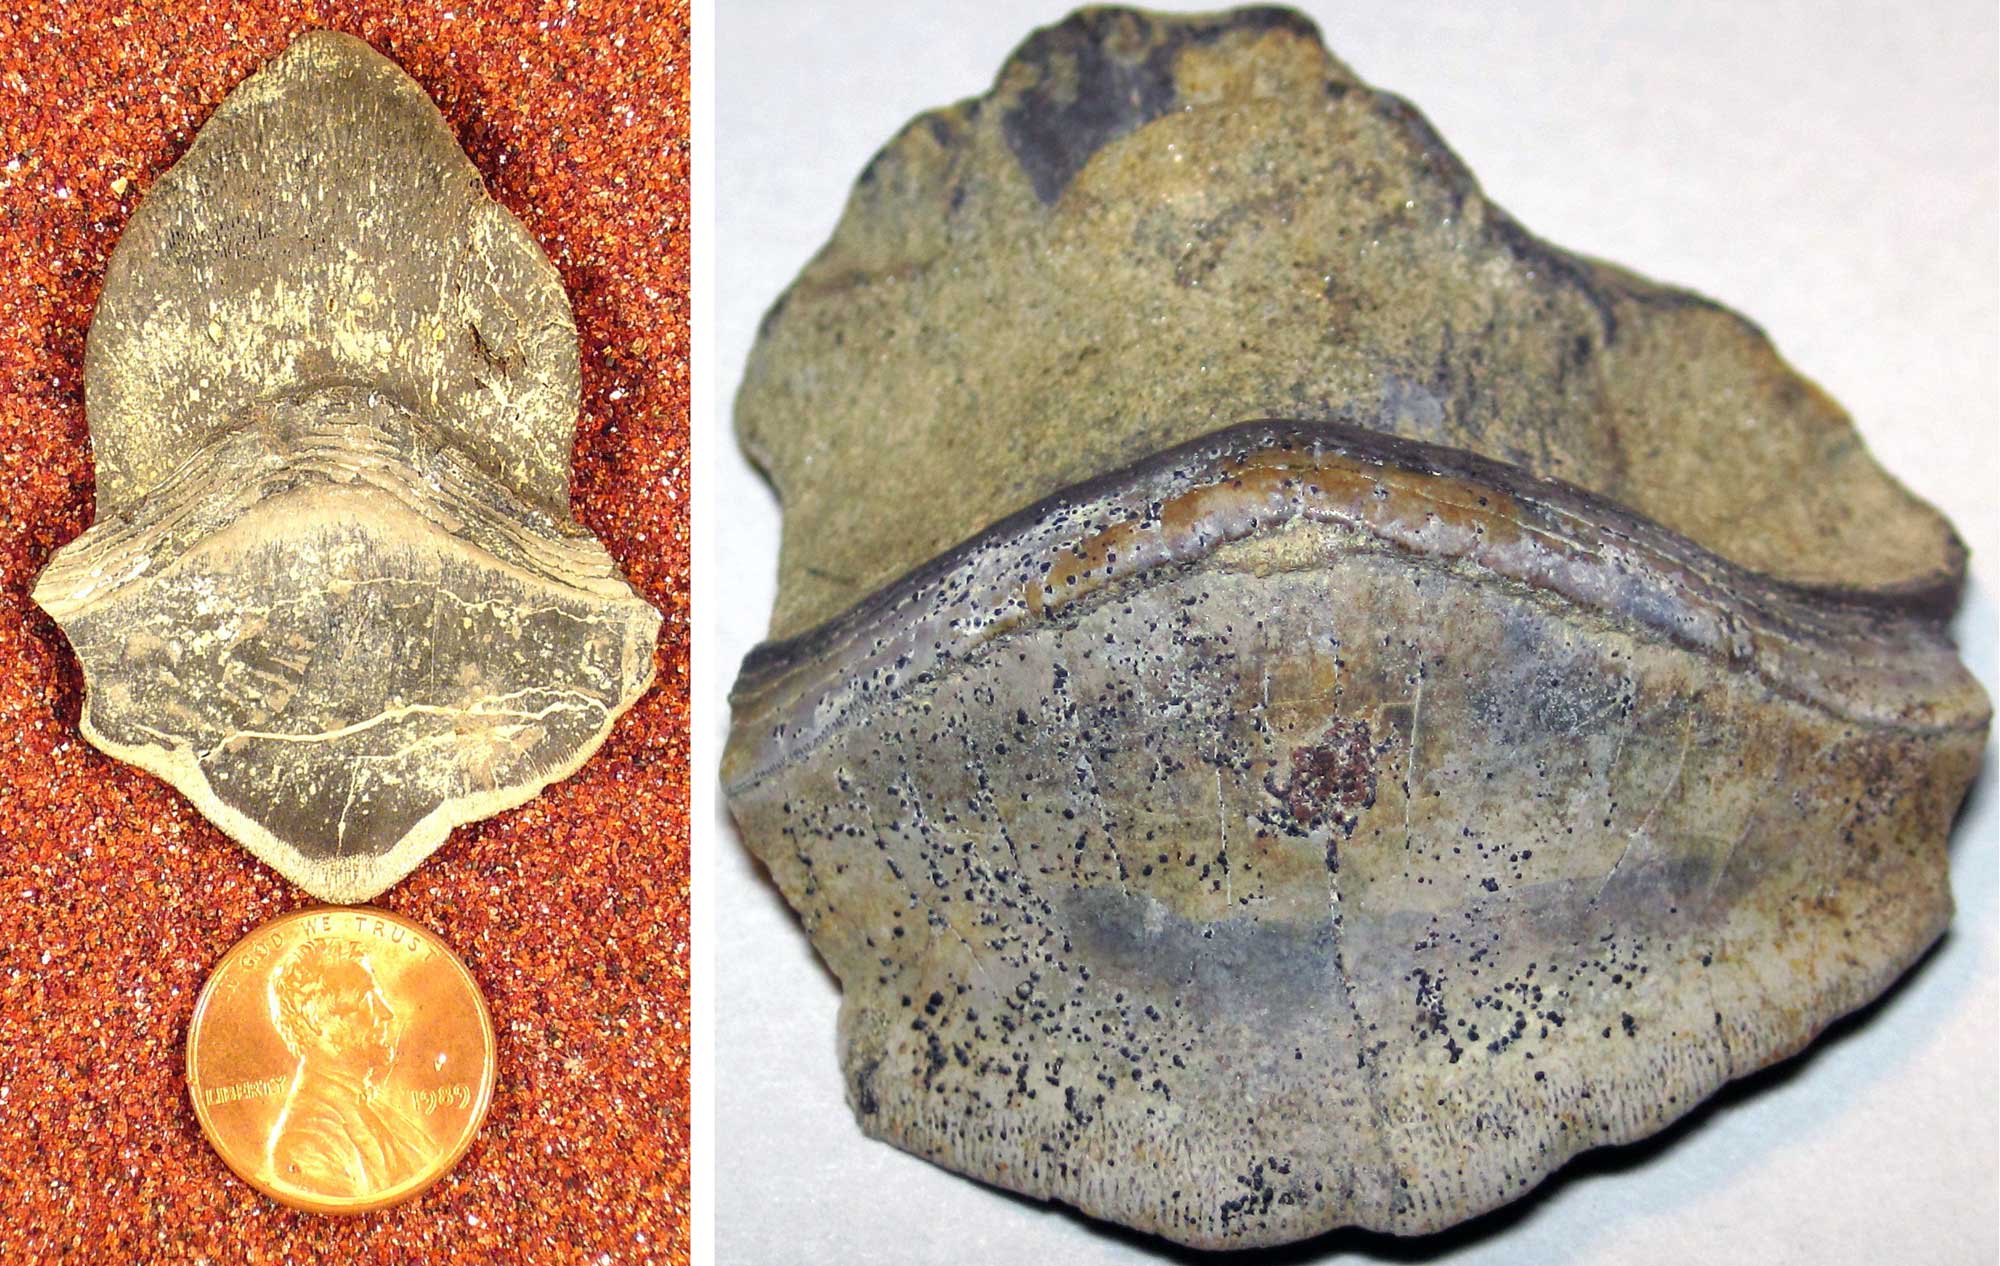 2-panel figure of shark teeth from the Pennsylvanian of Ohio. Panel 1: Photo of a tooth above a U.S. penny. The tooth is much larger than the penny. It has a roughly triangular tip with curved sides. The root at the bottom has a curved top and a slightly pointed base. Panel 2: Photo of another tooth that is not as well preserved as the first. This tooth appears to have a complete root, but the upper part is broken.